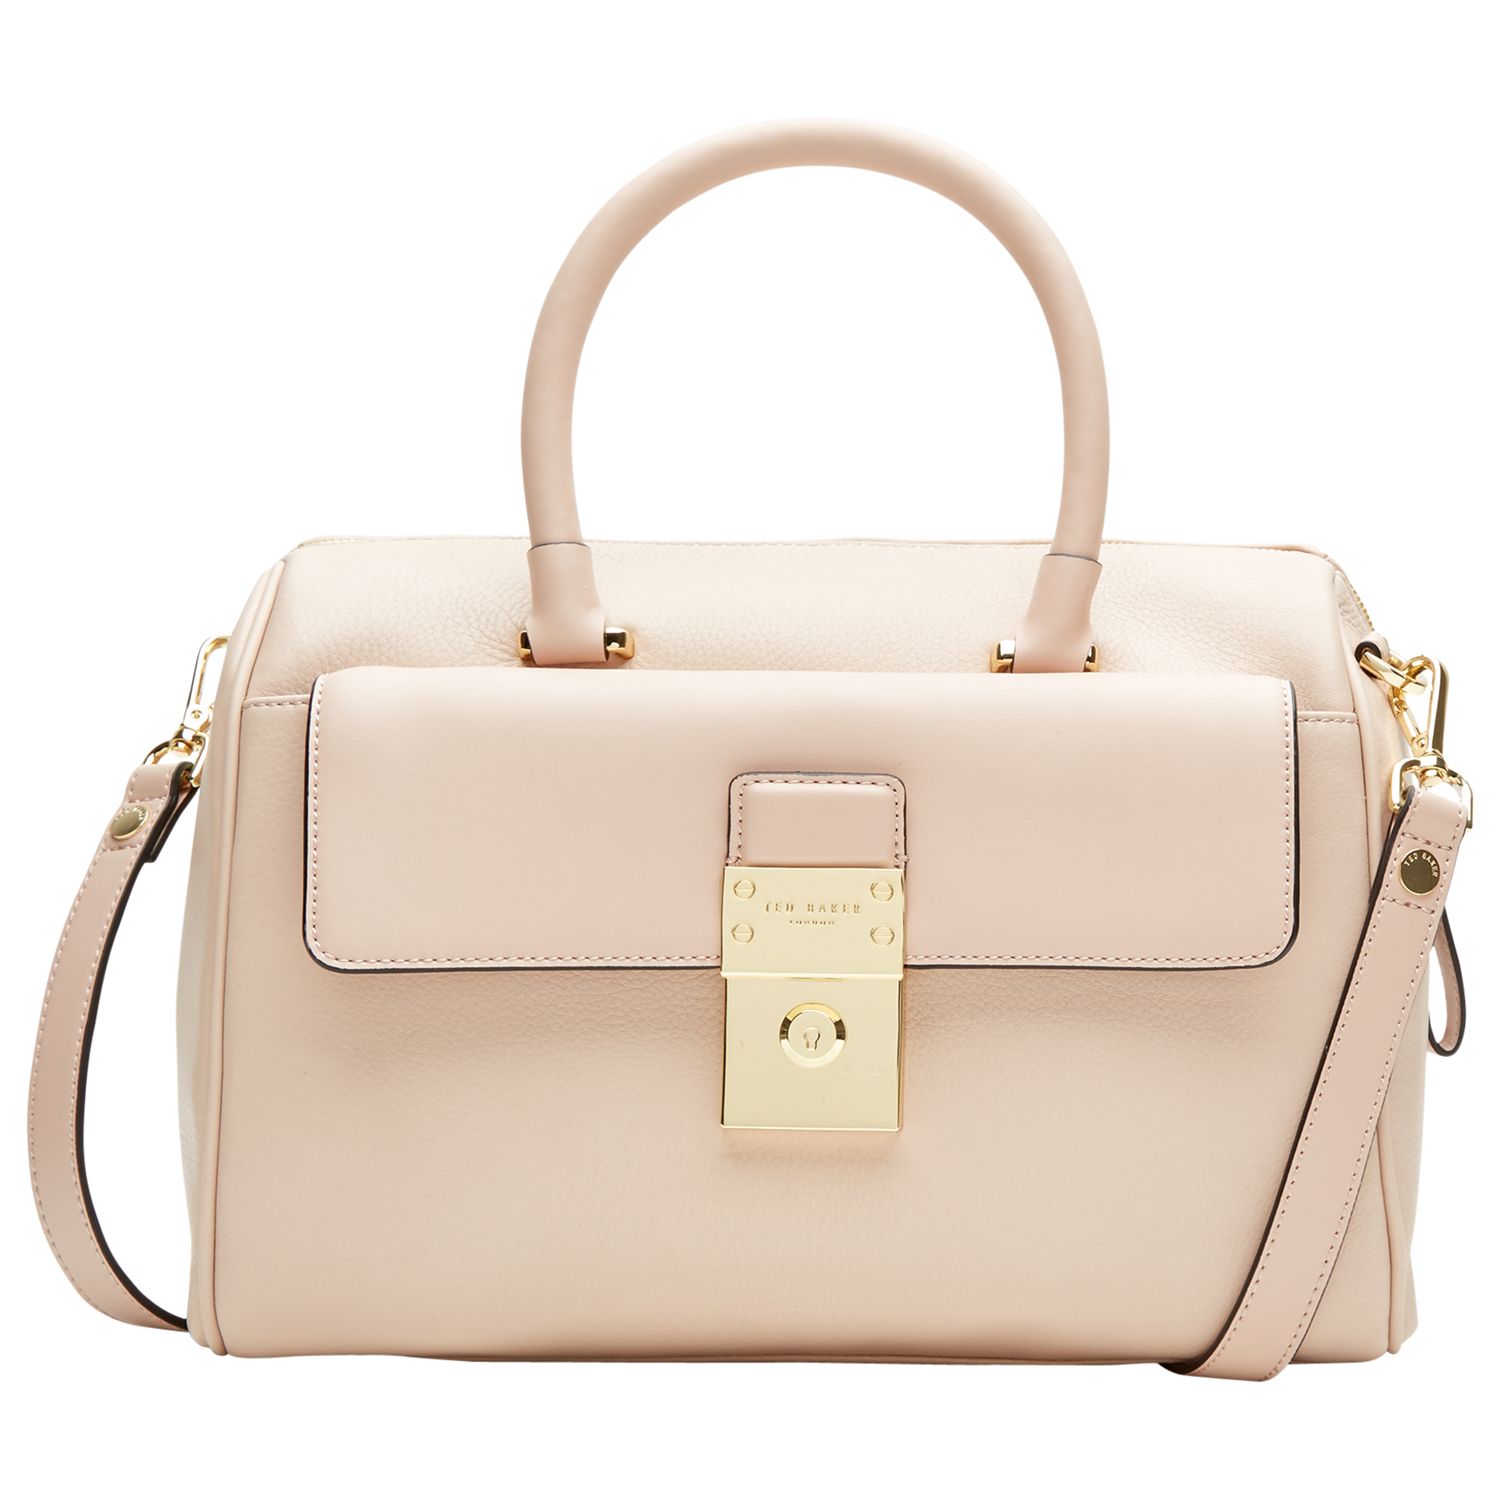 Ted Baker Darcey Leather Duffle Bag